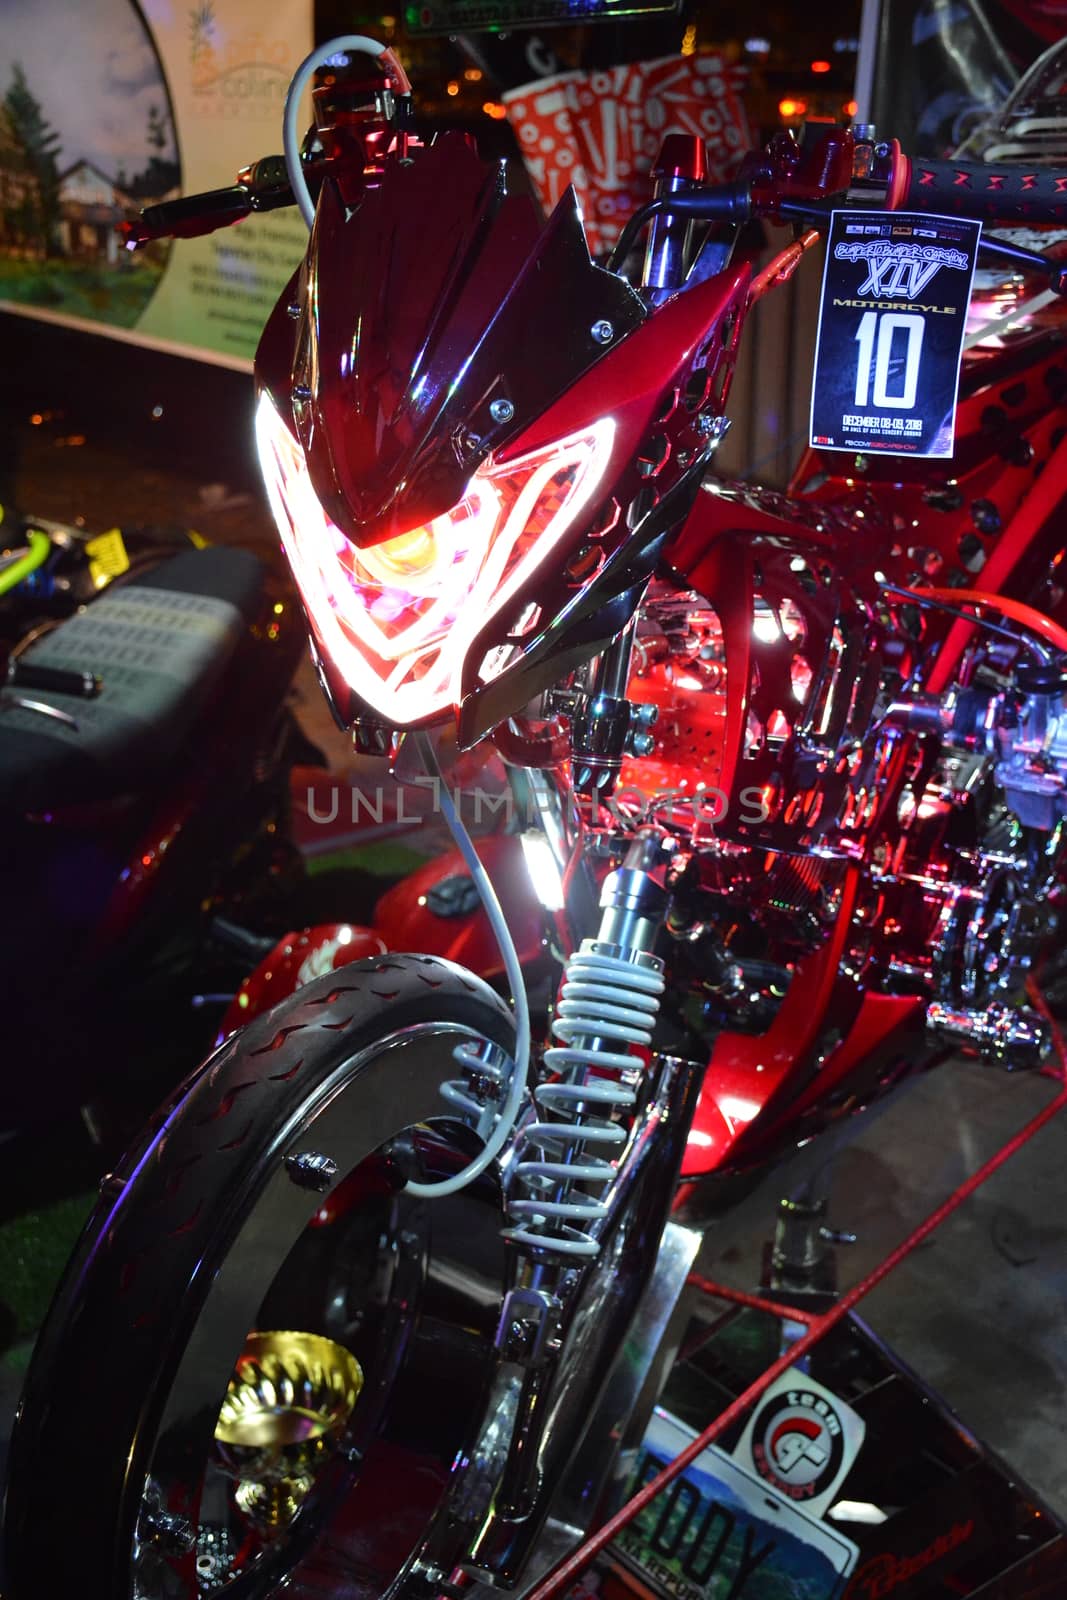 Customized motorcycle at Bumper to Bumper car show in Pasay, Phi by imwaltersy